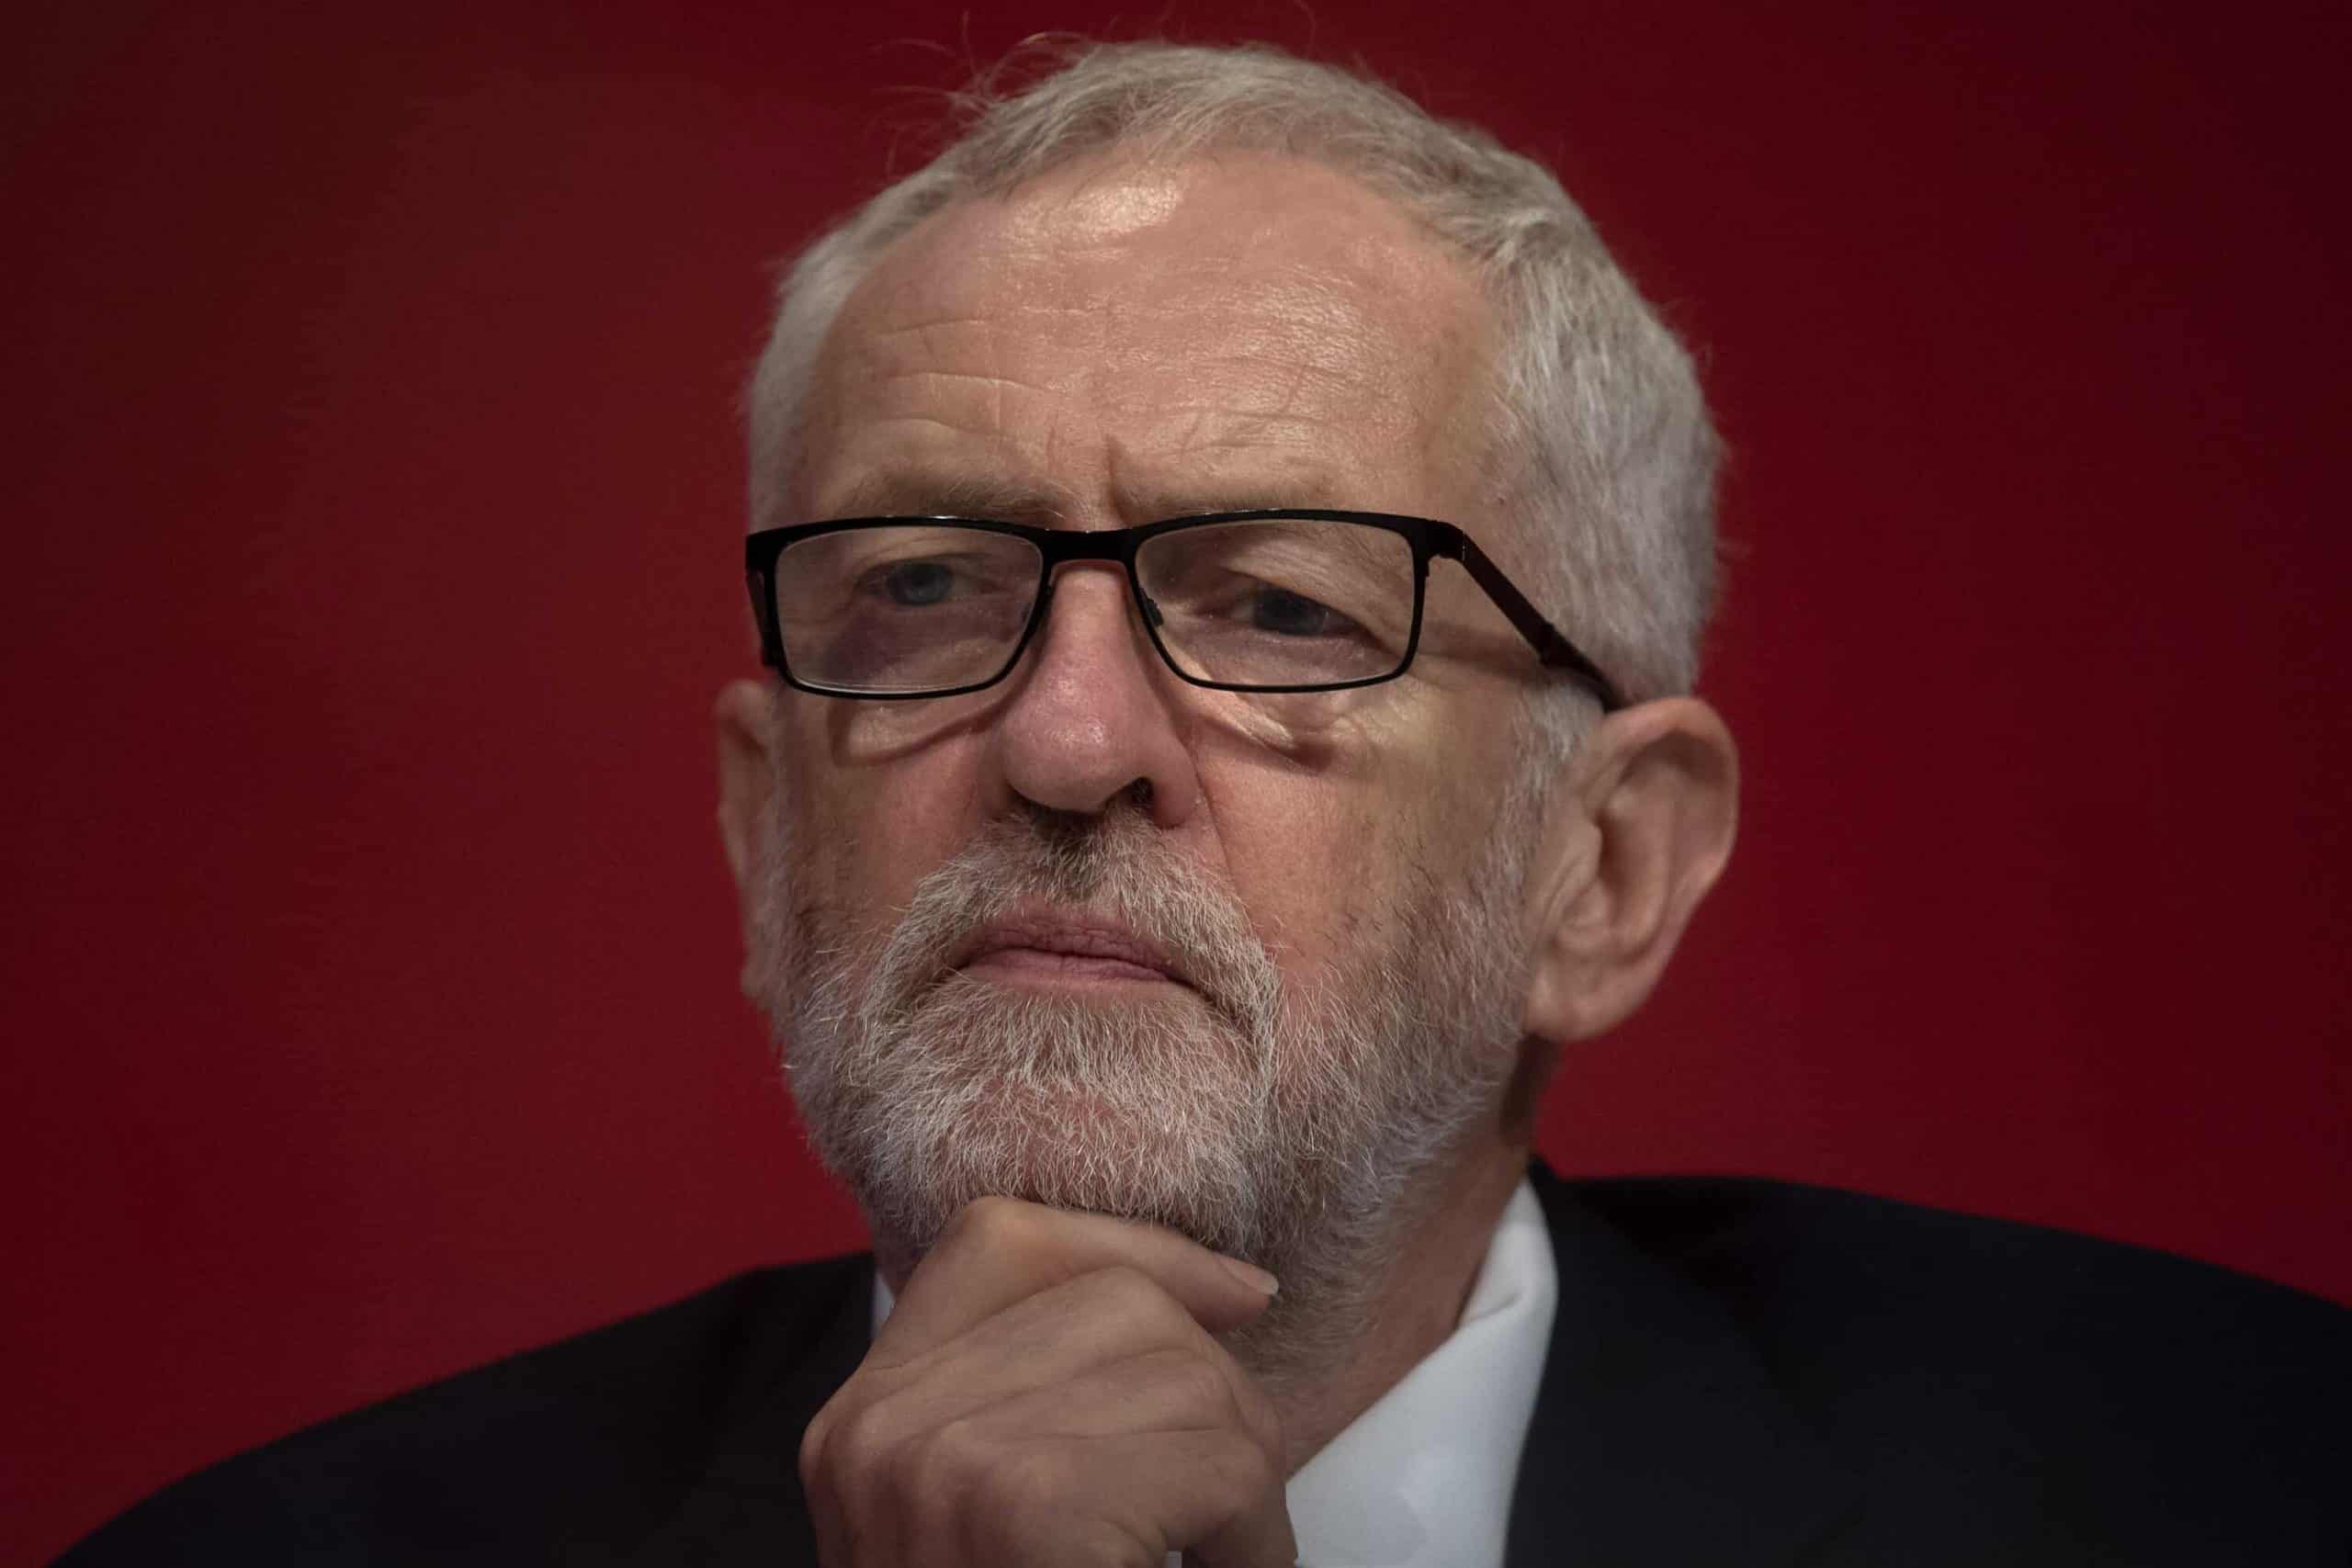 Polarising the electorate won’t solve anything – Labour is right to put it back to the people